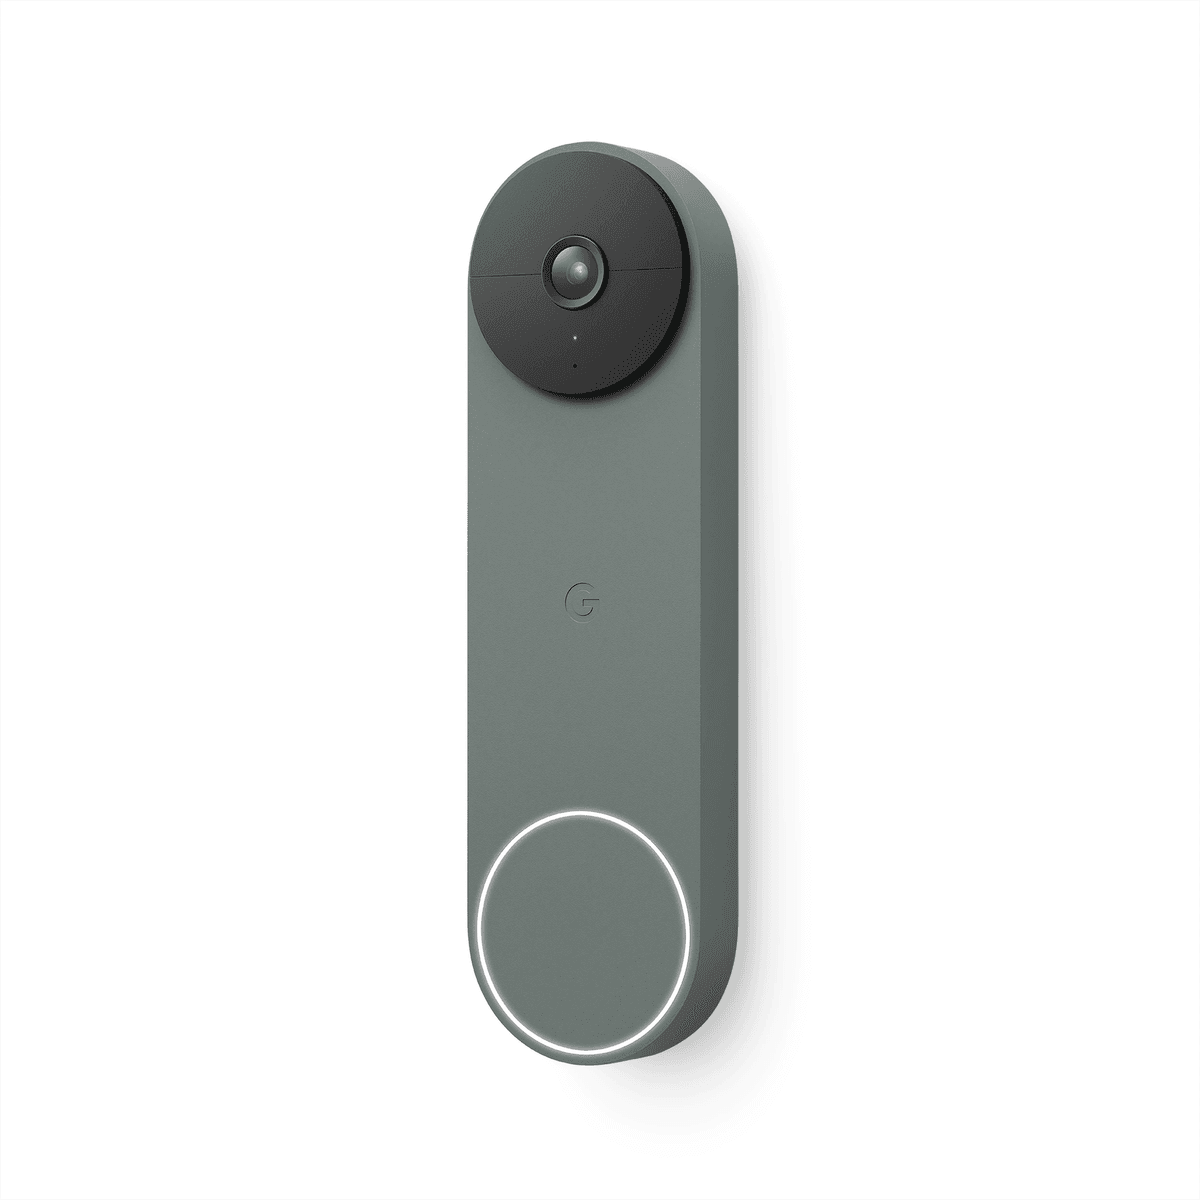 With a Google video doorbell, you can see who is at the front door whether you're home or many miles away. (Courtesy of Google)